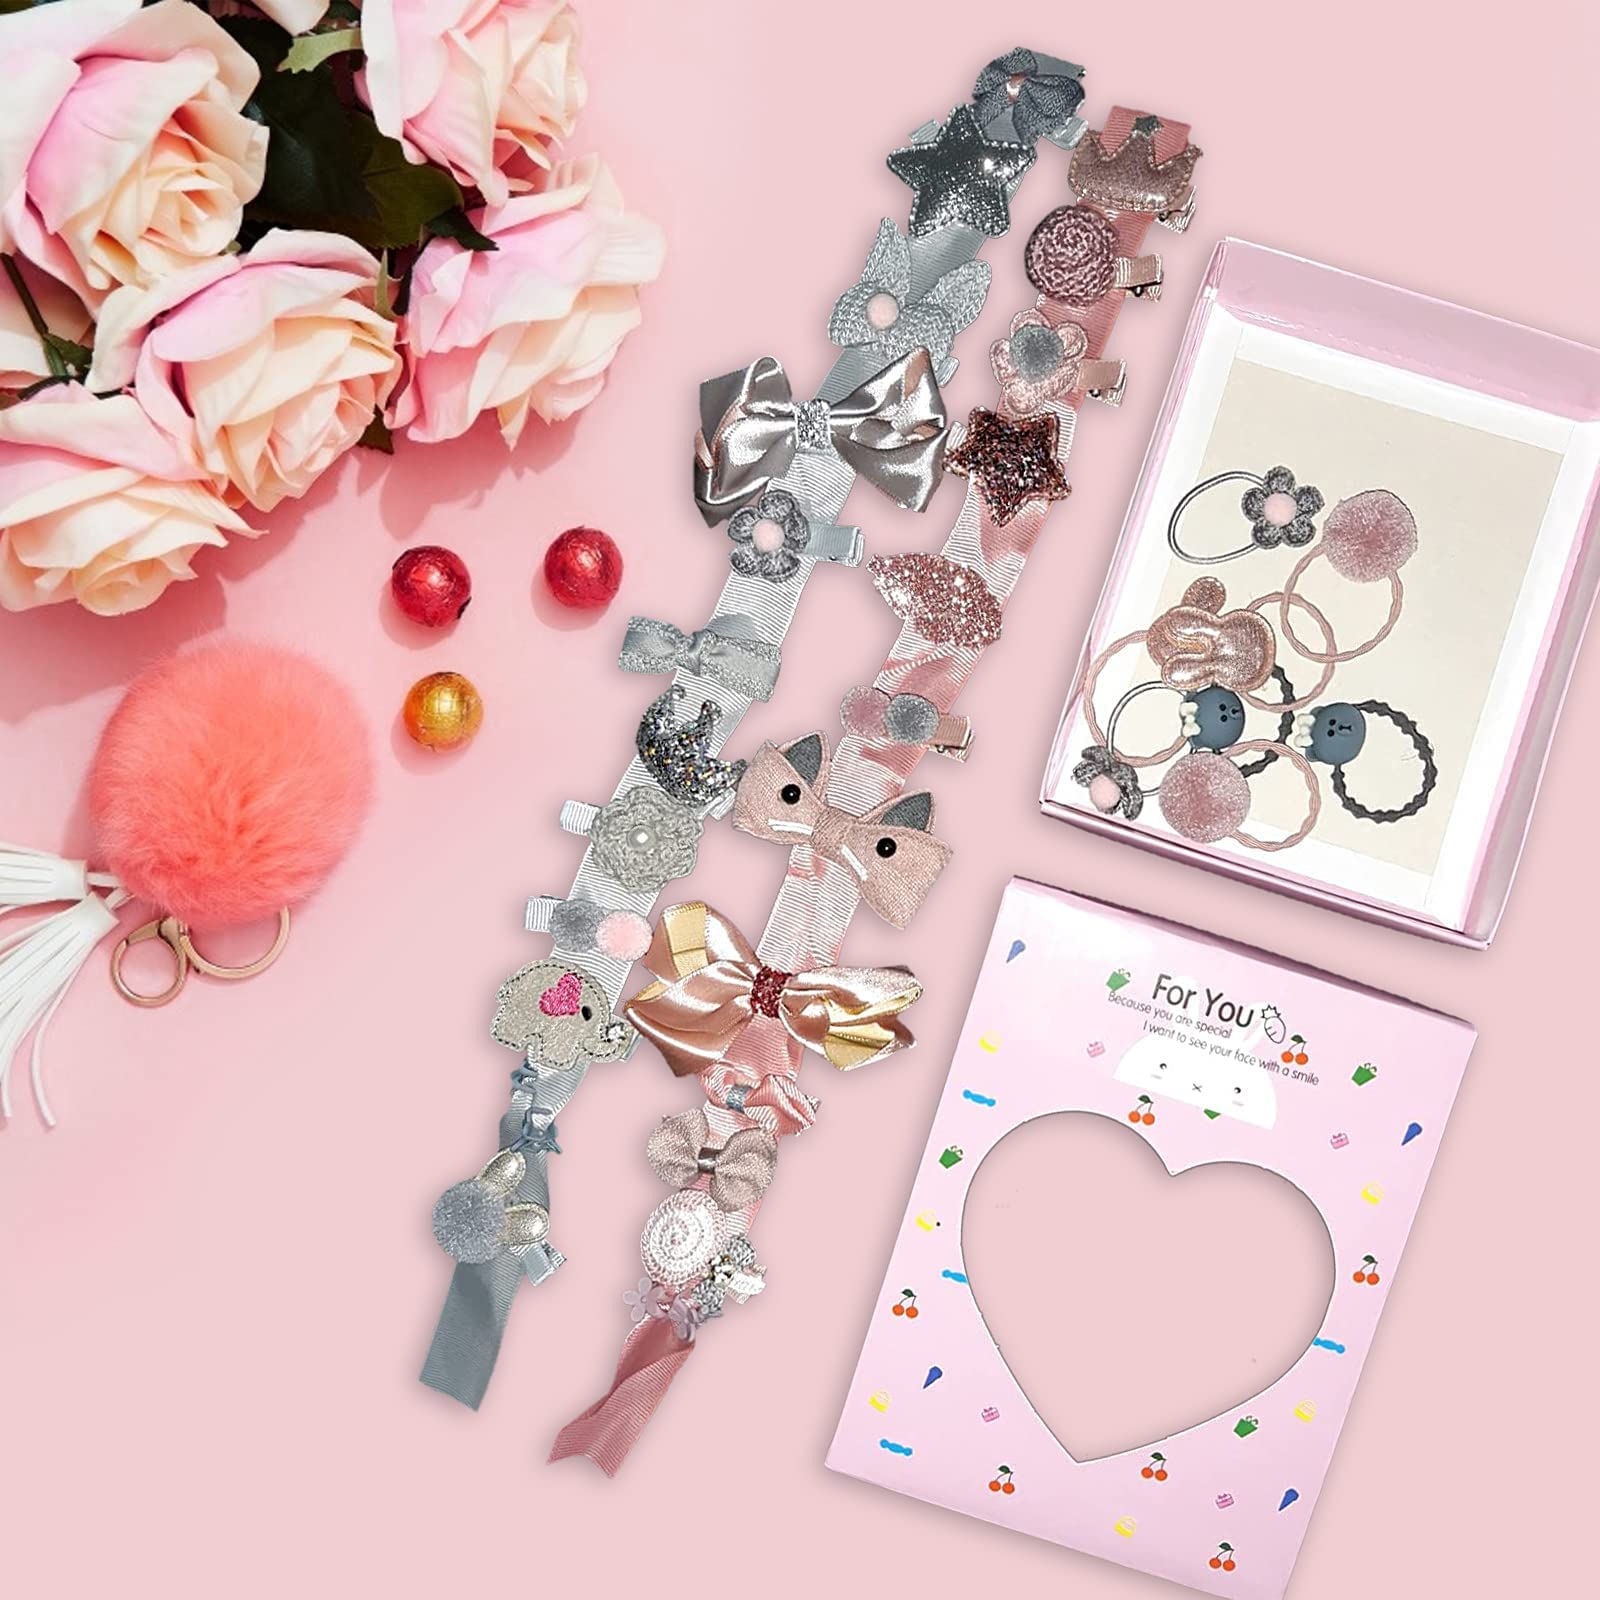 Baby Girl's Hair Clips Cute Hair Bows Baby Elastic Hair Ties Hair Accessories Ponytail Holder Hairpins Set For Baby Girls Teens Toddlers, Assorted styles, 36 pieces Pack(Pink+Grey)